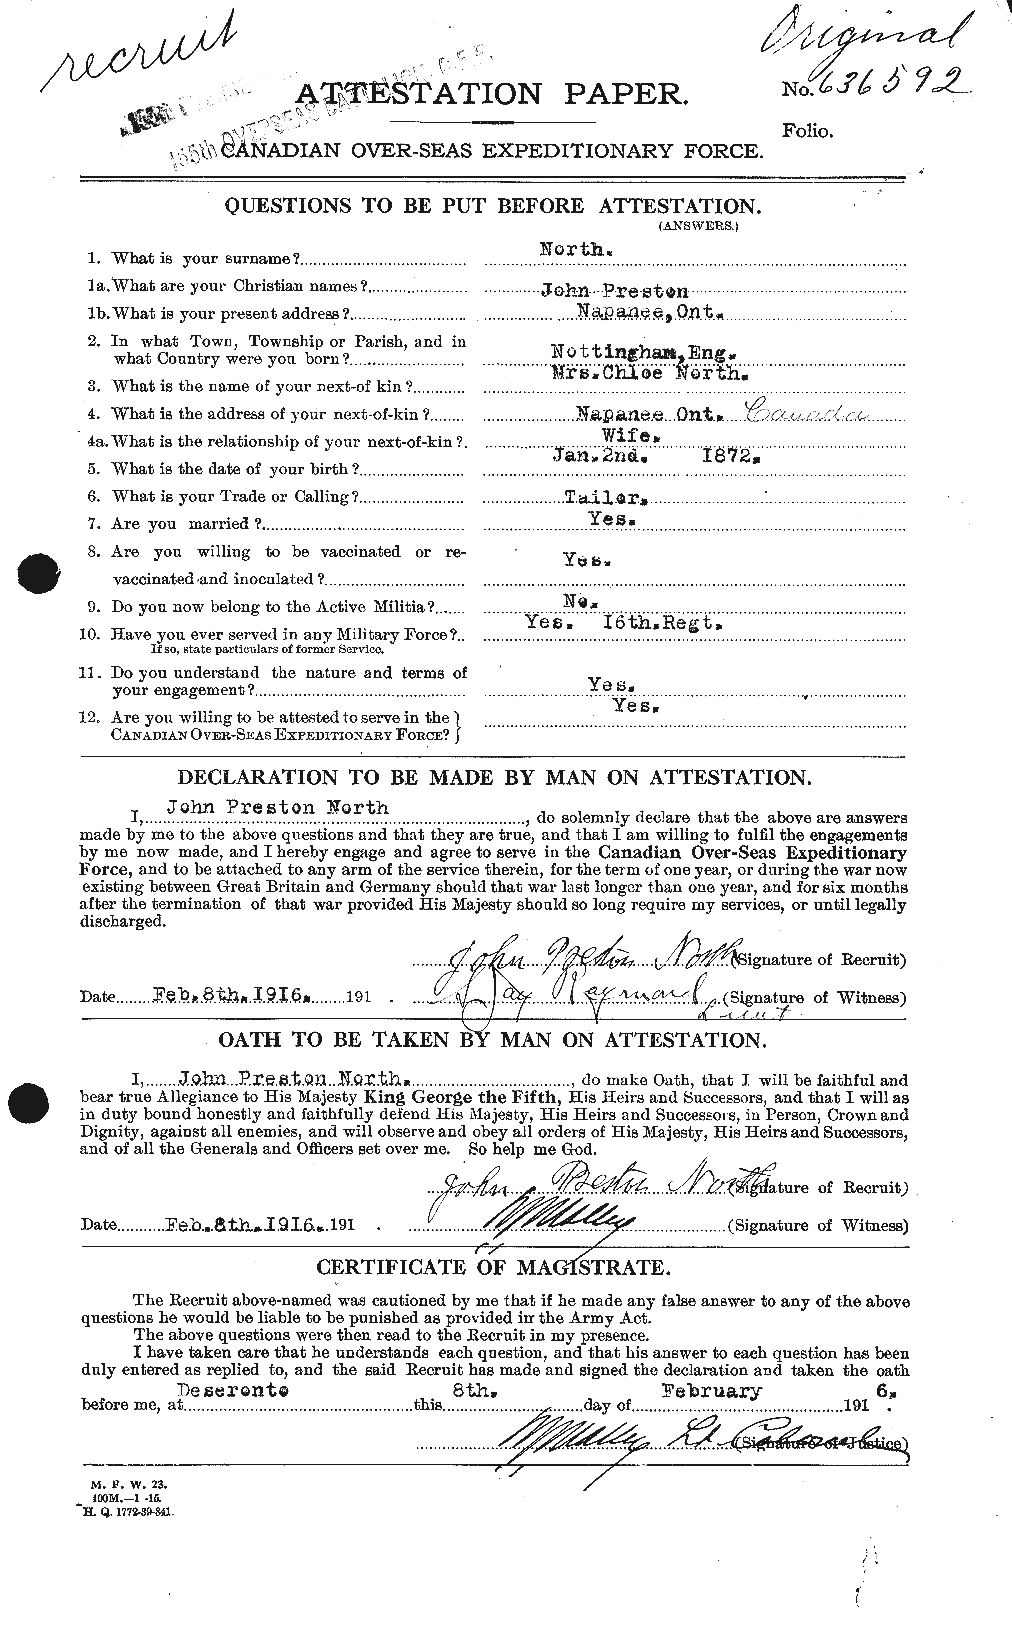 Personnel Records of the First World War - CEF 549914a